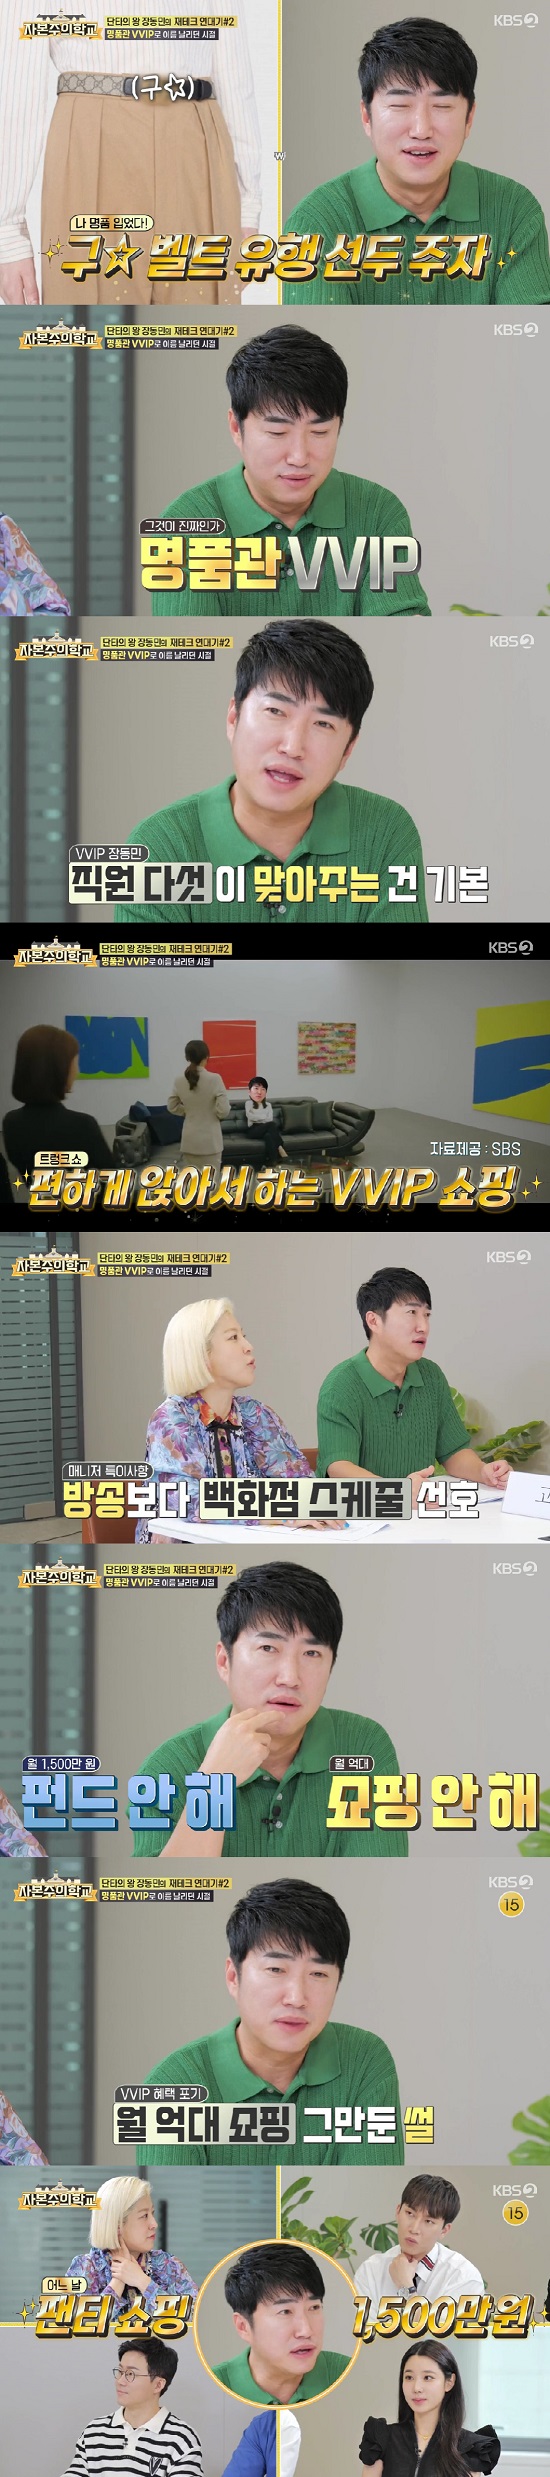 On the 31st KBS 2TV capitalist school, Jang Dong-min and Seo Soo-kyung appeared and talked about anecdotes.On the day of the broadcast, Defconn told Jang Dong-min that it was a Prestige storage VVIP and said, The G belt was the first of the comedians to make this very popular.So Jang Dong-min said, I usually valet and I dont (I do) do that. I have about five employees.I have never been shooting while going to the store and I sat comfortably. Asked how much luxury goods he bought a month, Jang Dong-min replied, Ill finish at the time. Seo said, Its the top level.We have to buy billions a month, he added.Defconn said, There were many friends who picked up the luxury goods that Jang Dong-min spilled.Jang Dong-min said, At that time, I thought it was a schedule for managers to go to department stores rather than coming to the broadcasting station. Even though it was summer, I went to the winter store and touched the jumper.I did not even talk to you when I was in the middle of the shooting for 30 minutes.I have taken out the car. I did so many times, he said. I do not regret my life, but if I go back then I do not want to do it.Asked what he would like to do during the fund and shopping with a return of -90% or more, Jang Dong-min said, I did not do shopping.I thought I should stop buying 15 million won worth of panties. It is real. I honestly thought it was 1.5 million won, but when I bought a lot, it was 15 million won, he said.Photo: KBS 2TV broadcast screen